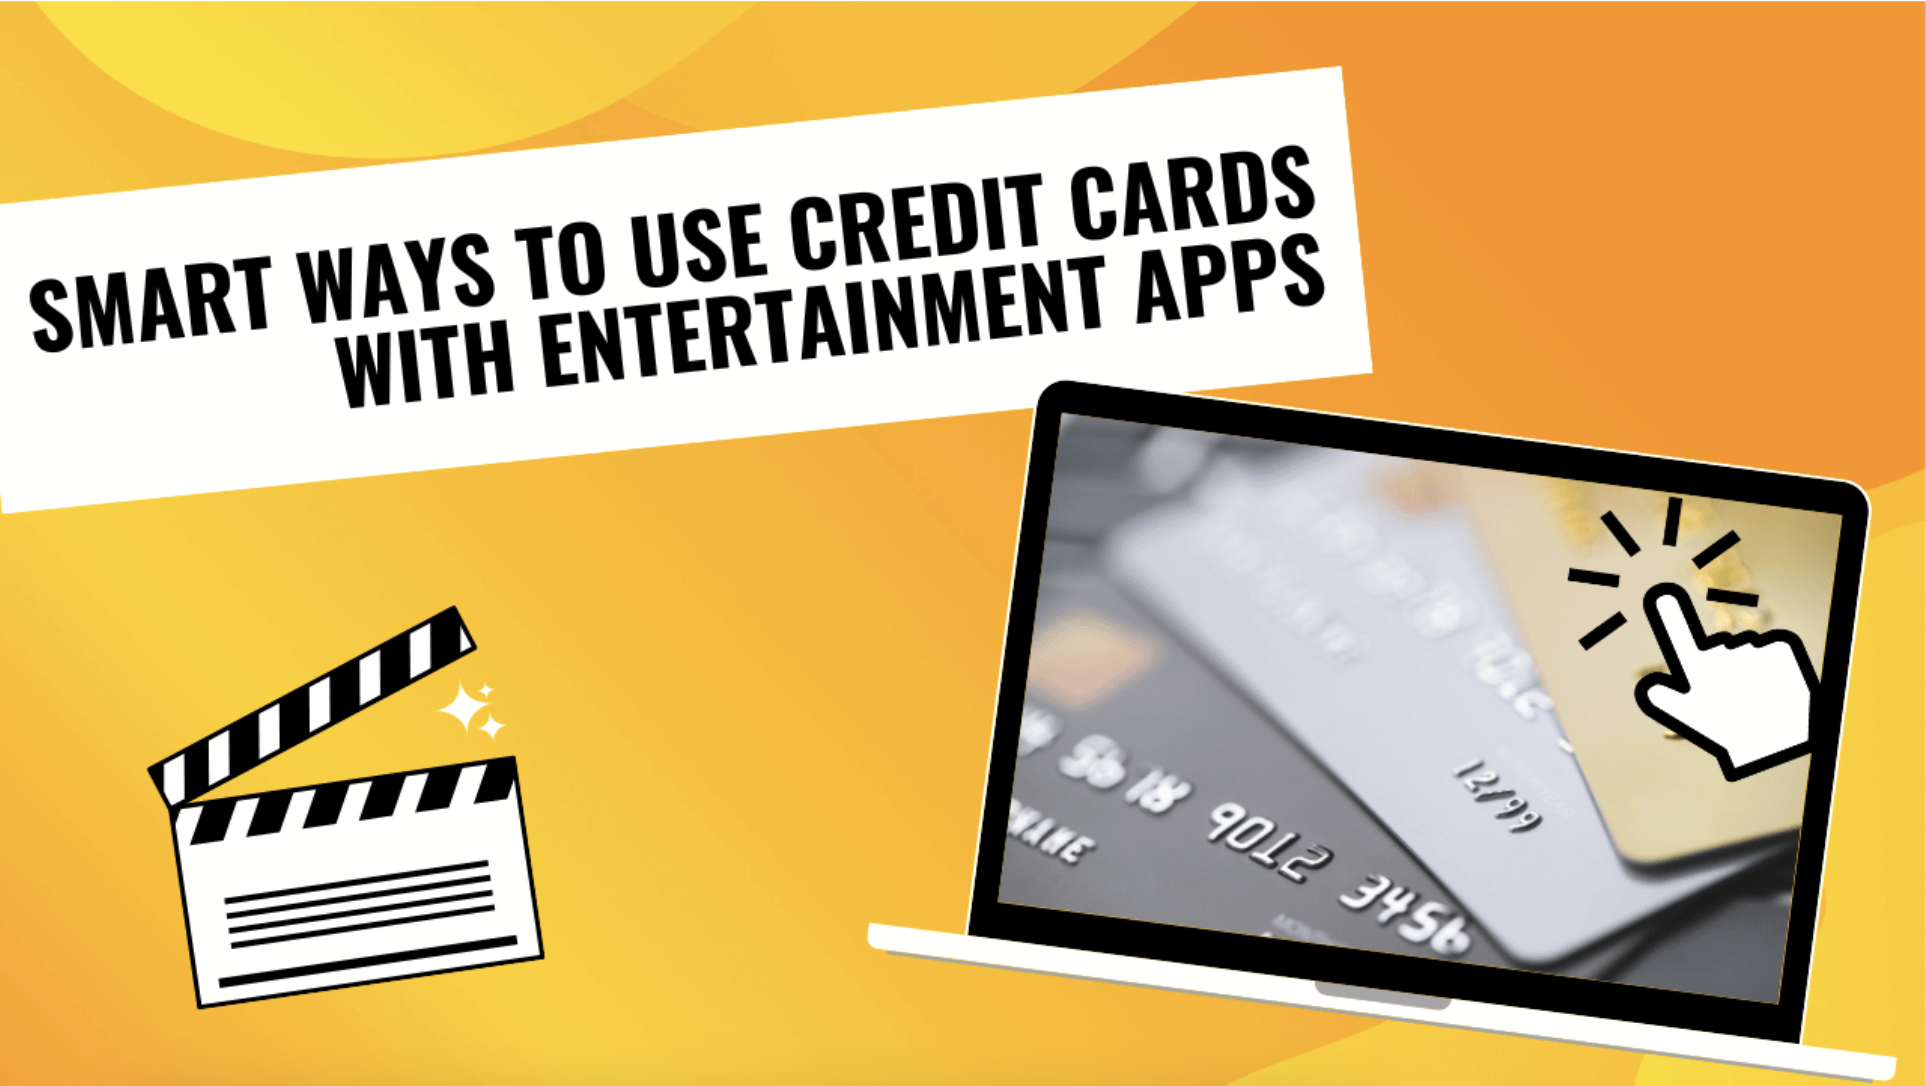 Smart Ways to Use Credit Cards with Entertainment Apps